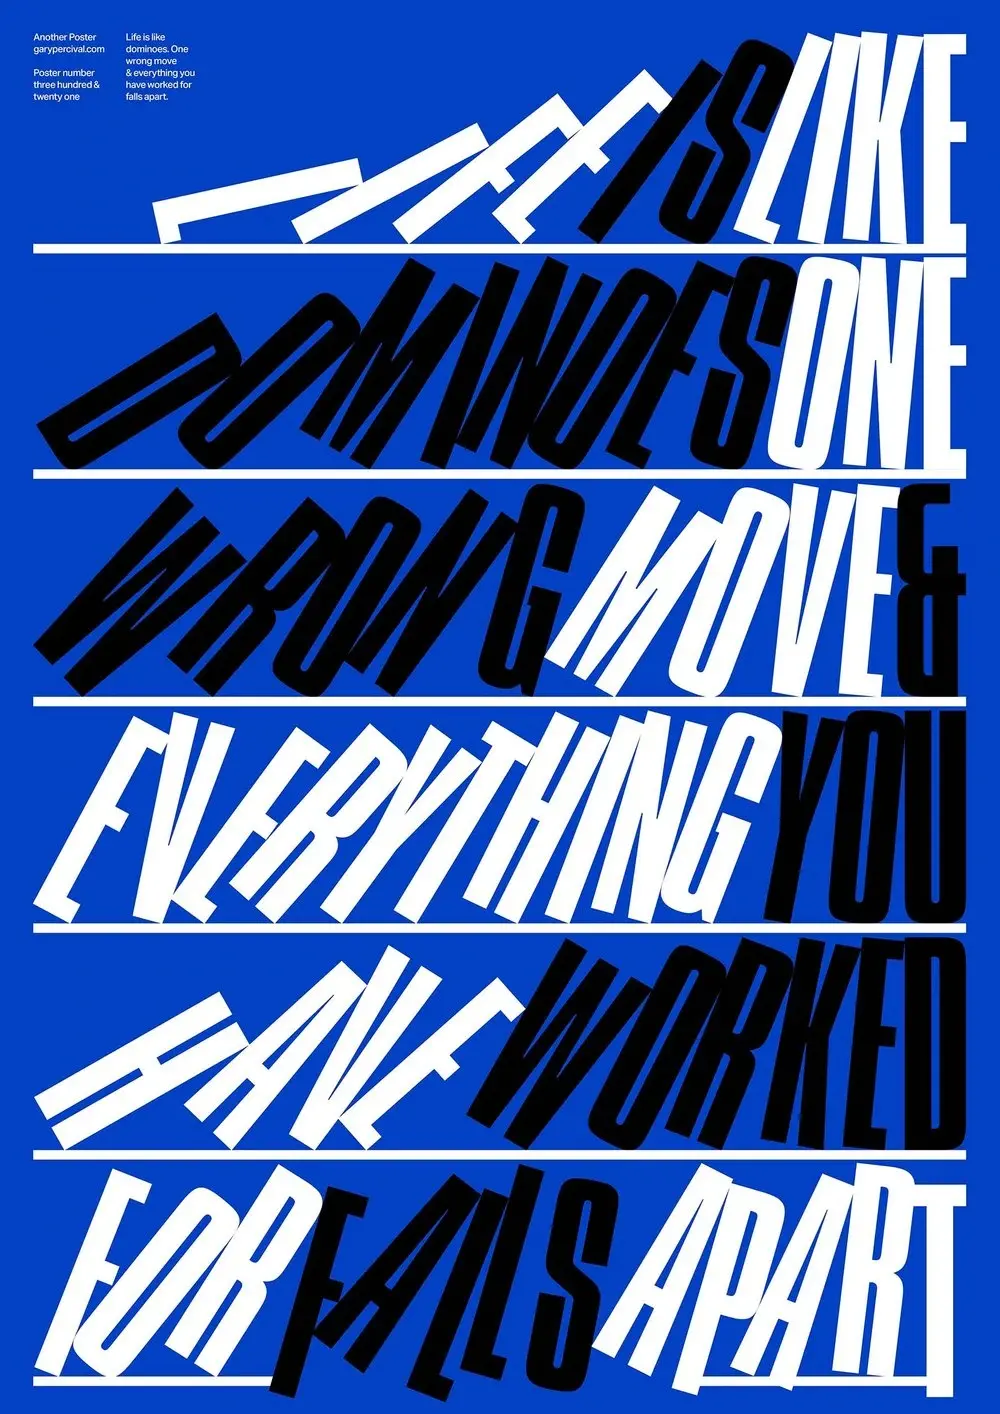 Blogduwebdesign inspiration affiches poster gary percival typographic poster life is like dominoes